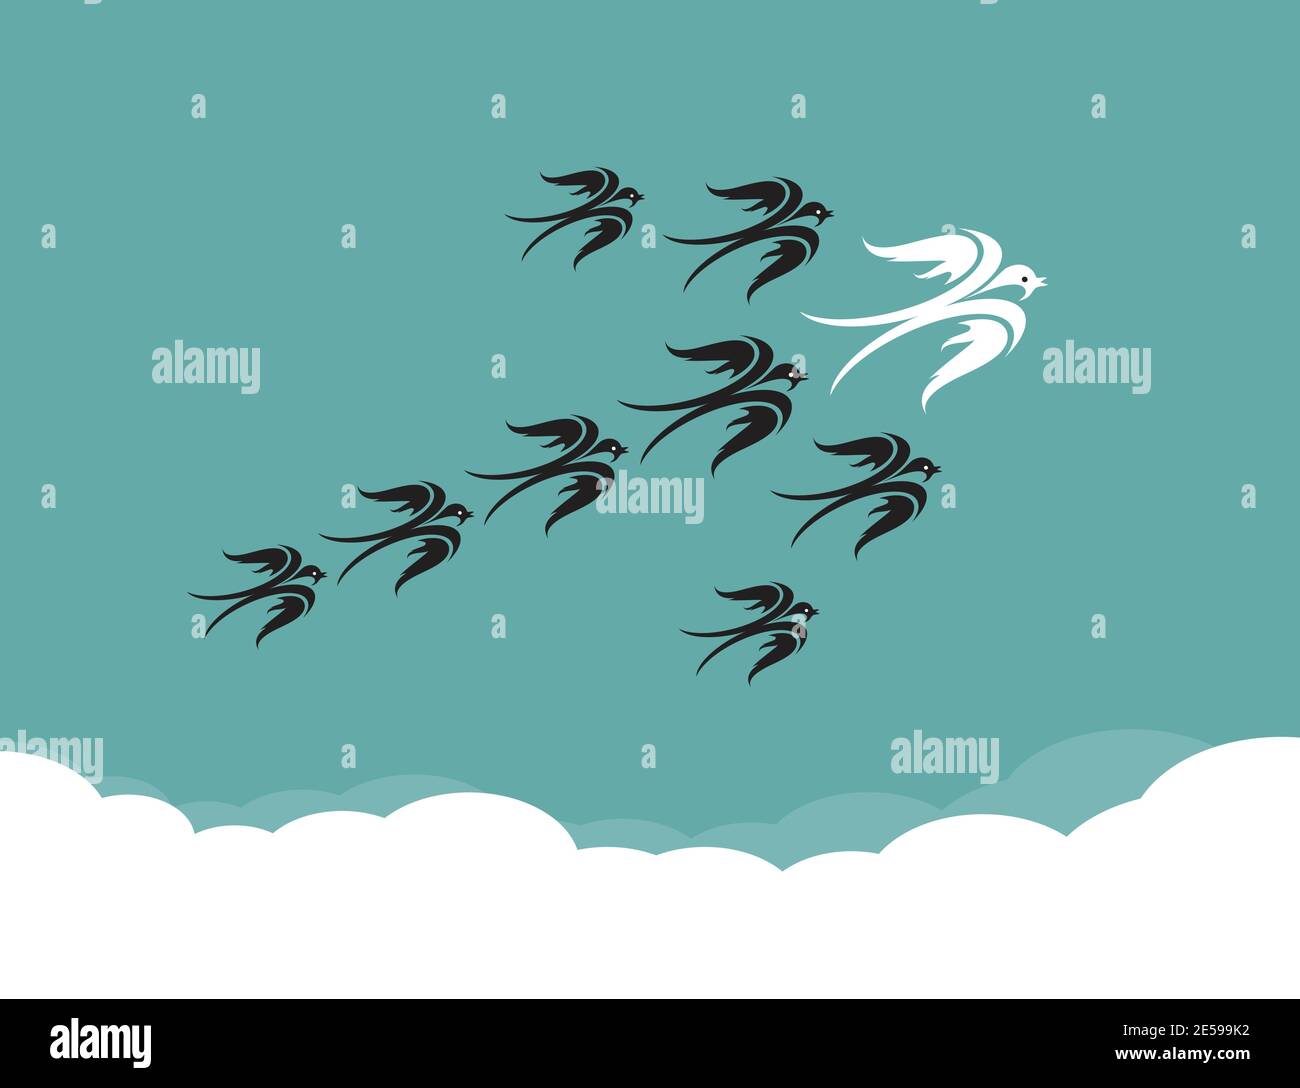 Flock of birds(swallow) flying in the sky, Leadership concept. Easy editable layered vector illustration. Stock Vector